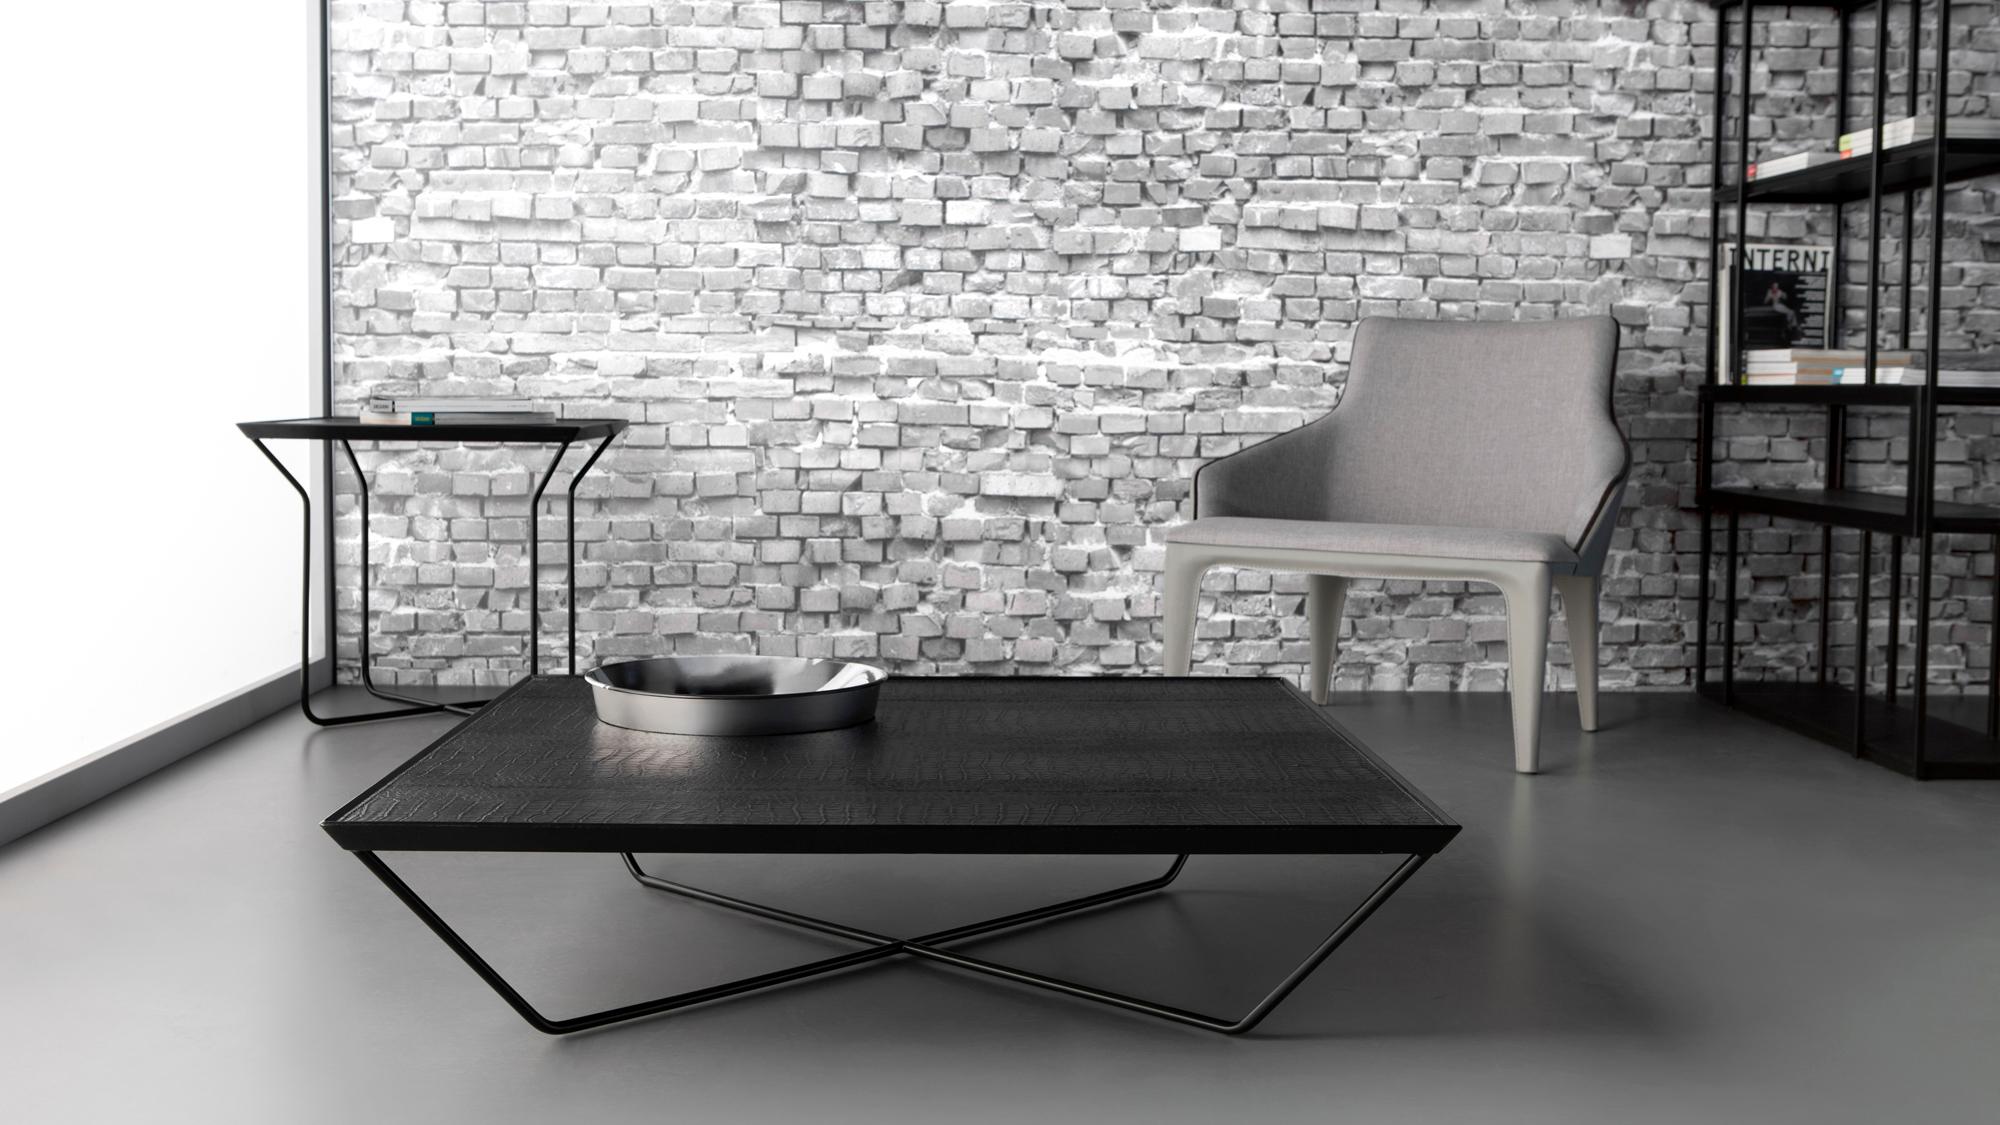 Case Coffee Table by Doimo Brasil
Dimensions: W 80 x D 80 x H 25 cm 
Materials: Base: Stainless Steel, Top: Aged/crocco reconstituted leather. 

Also available in other dimensions. Please contact us.

With the intention of providing good taste and